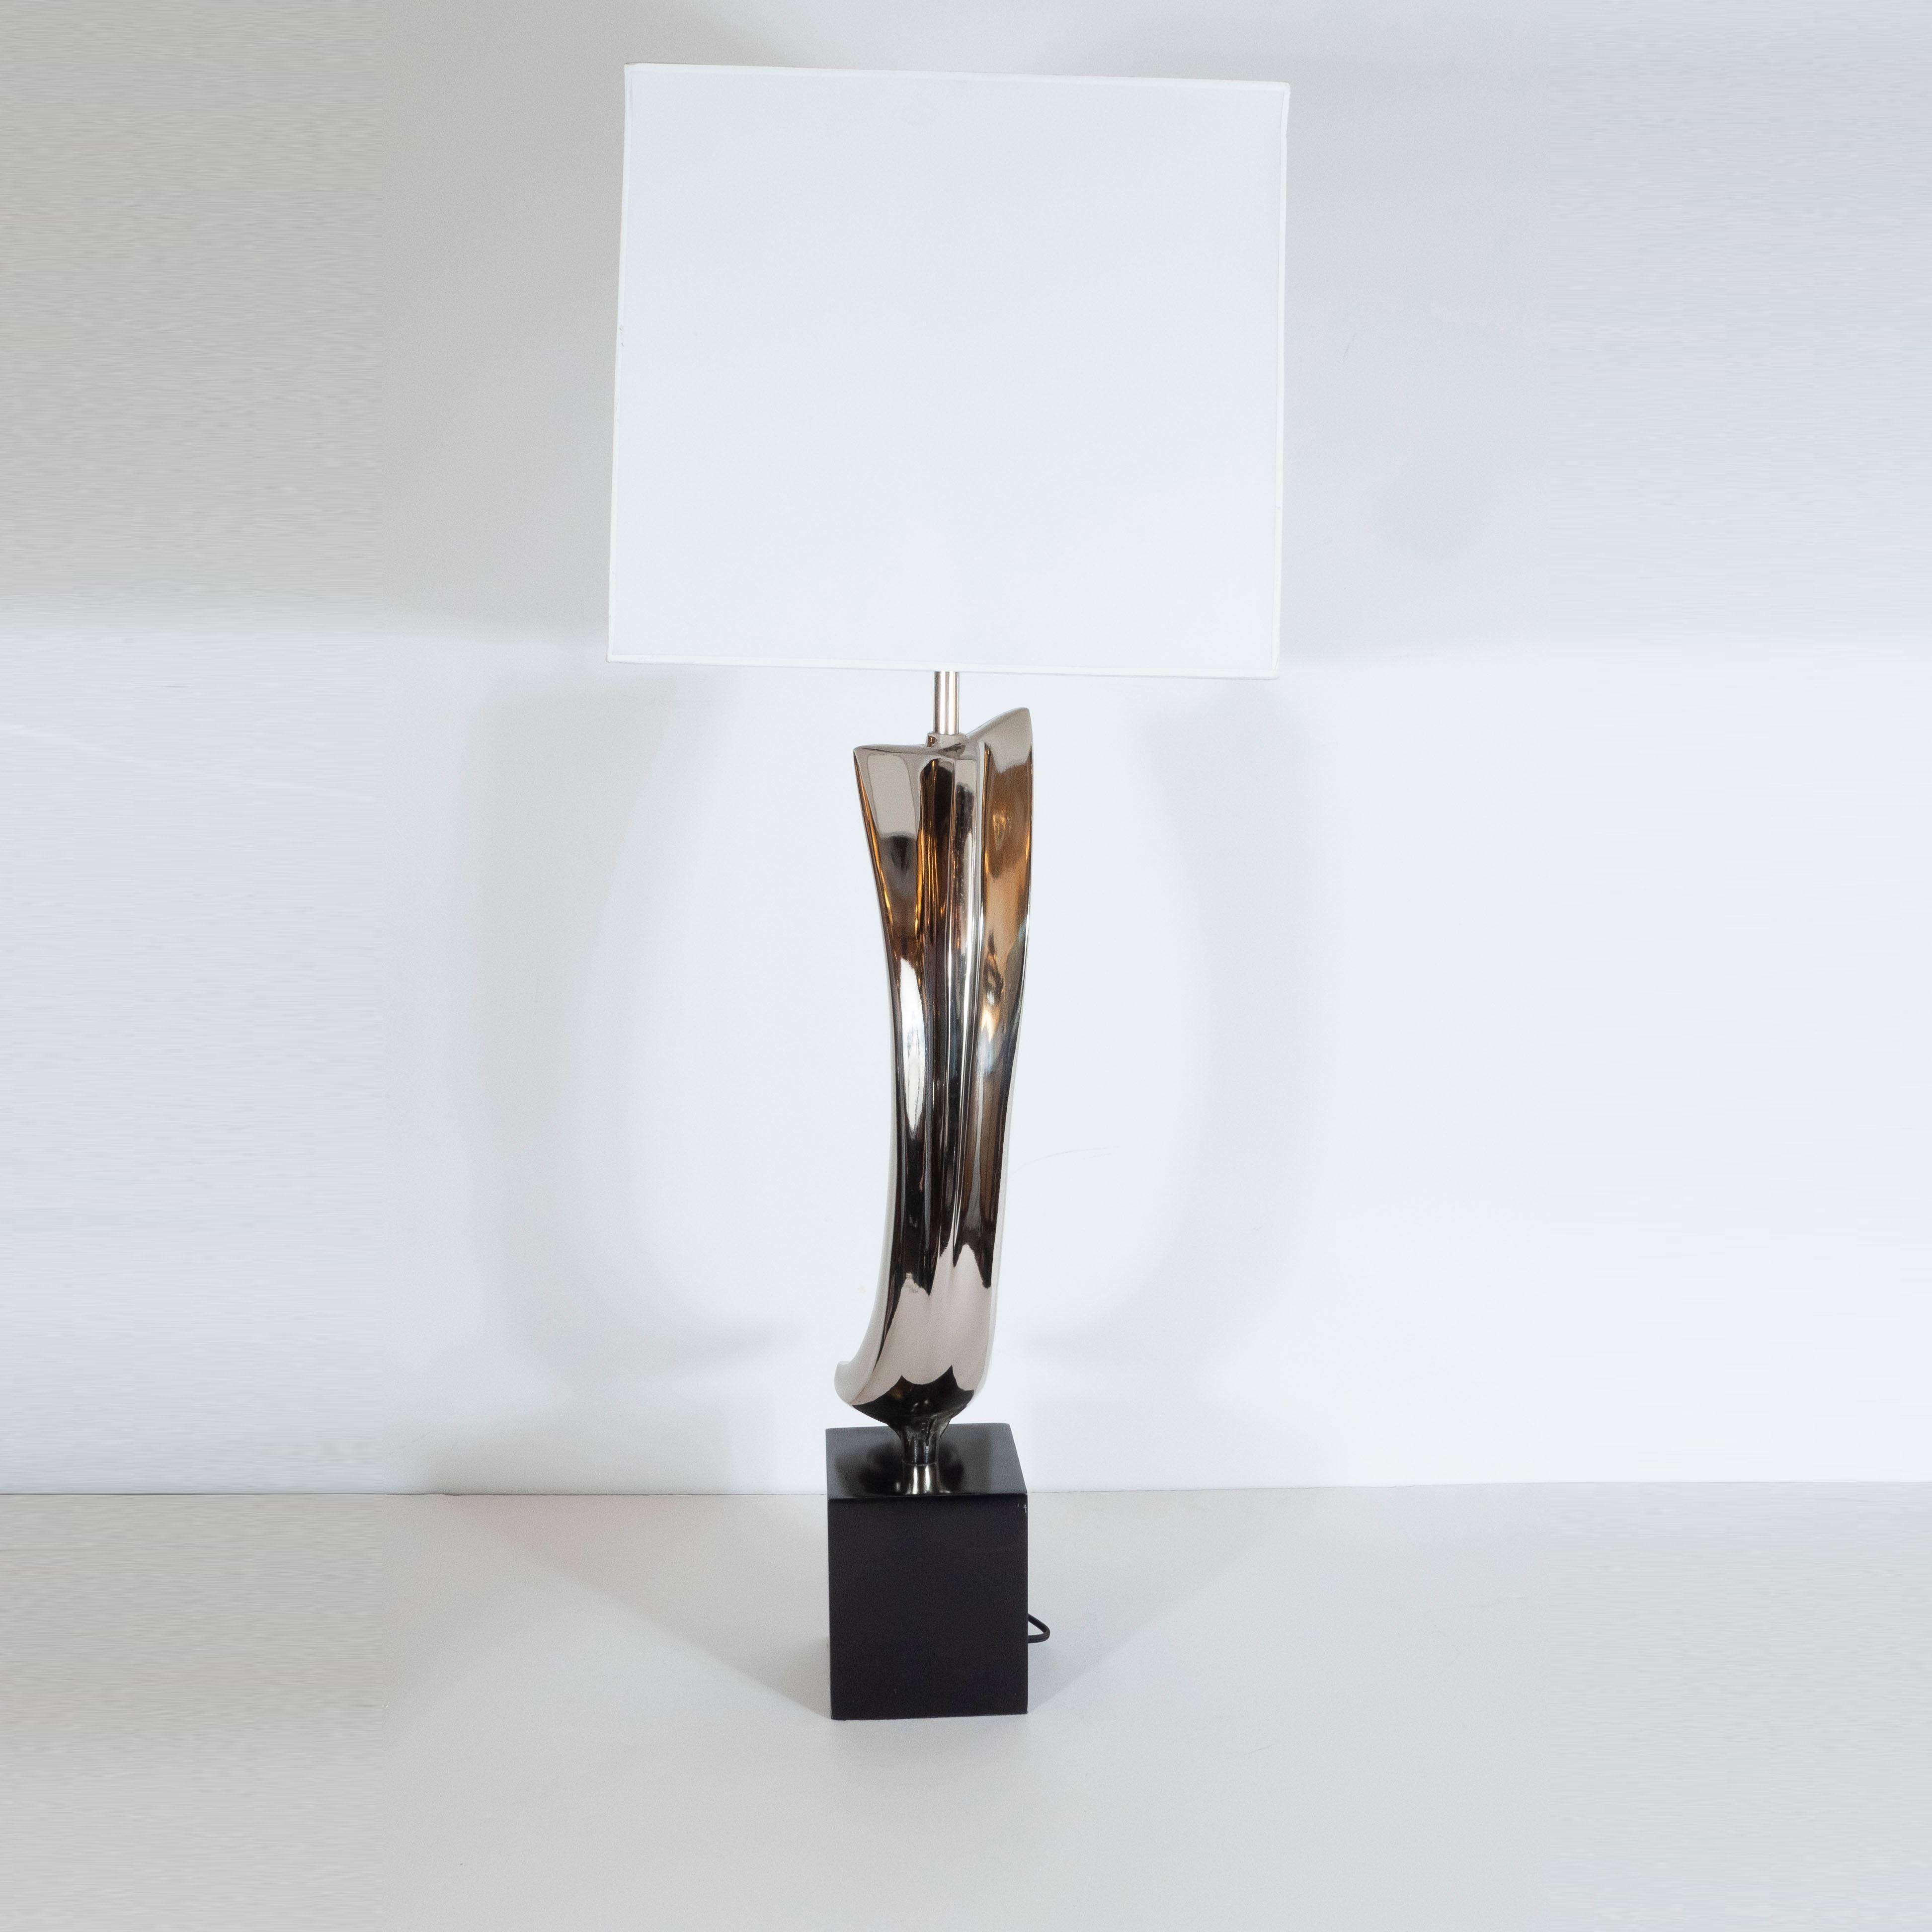 Enamel Midcentury Brutalist Table Lamp by Weiss & Barr for Laurel Lamp Co. For Sale